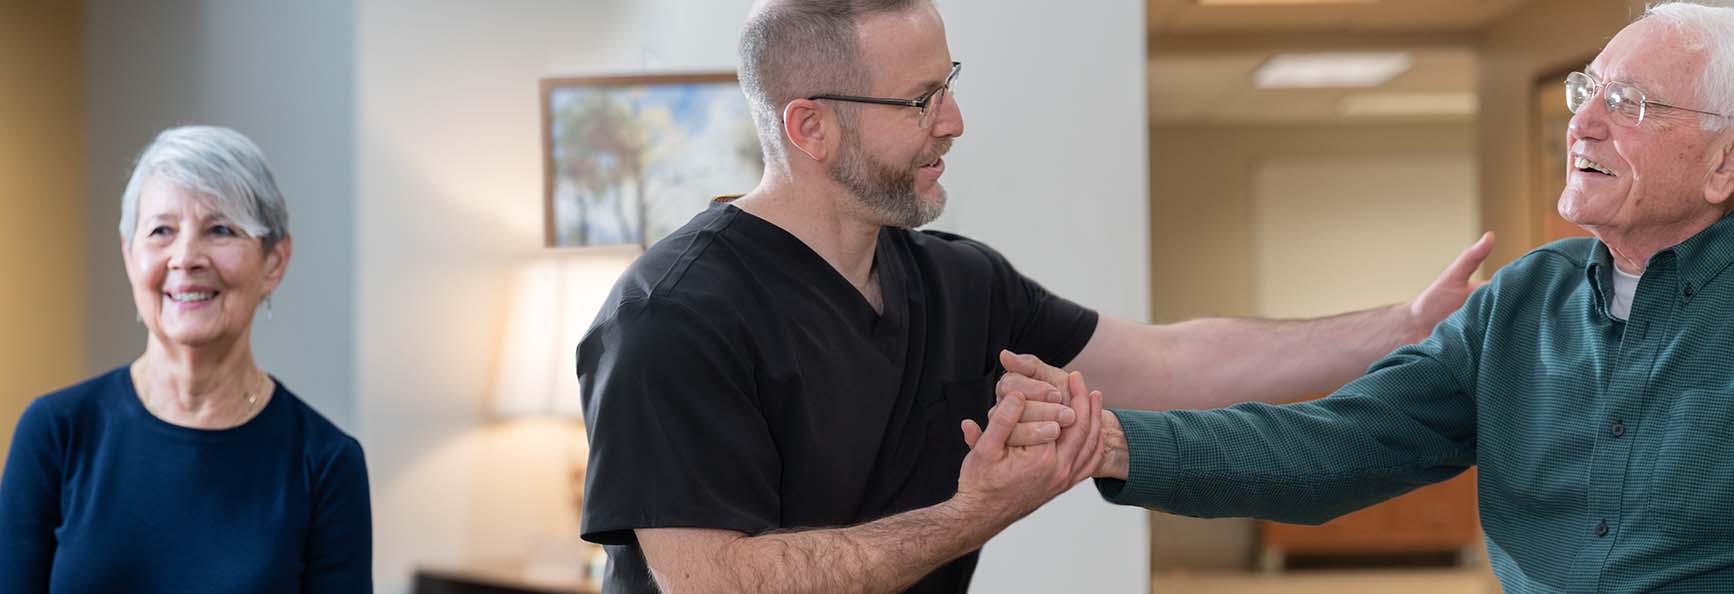 Older male patient interacting with clinical staff